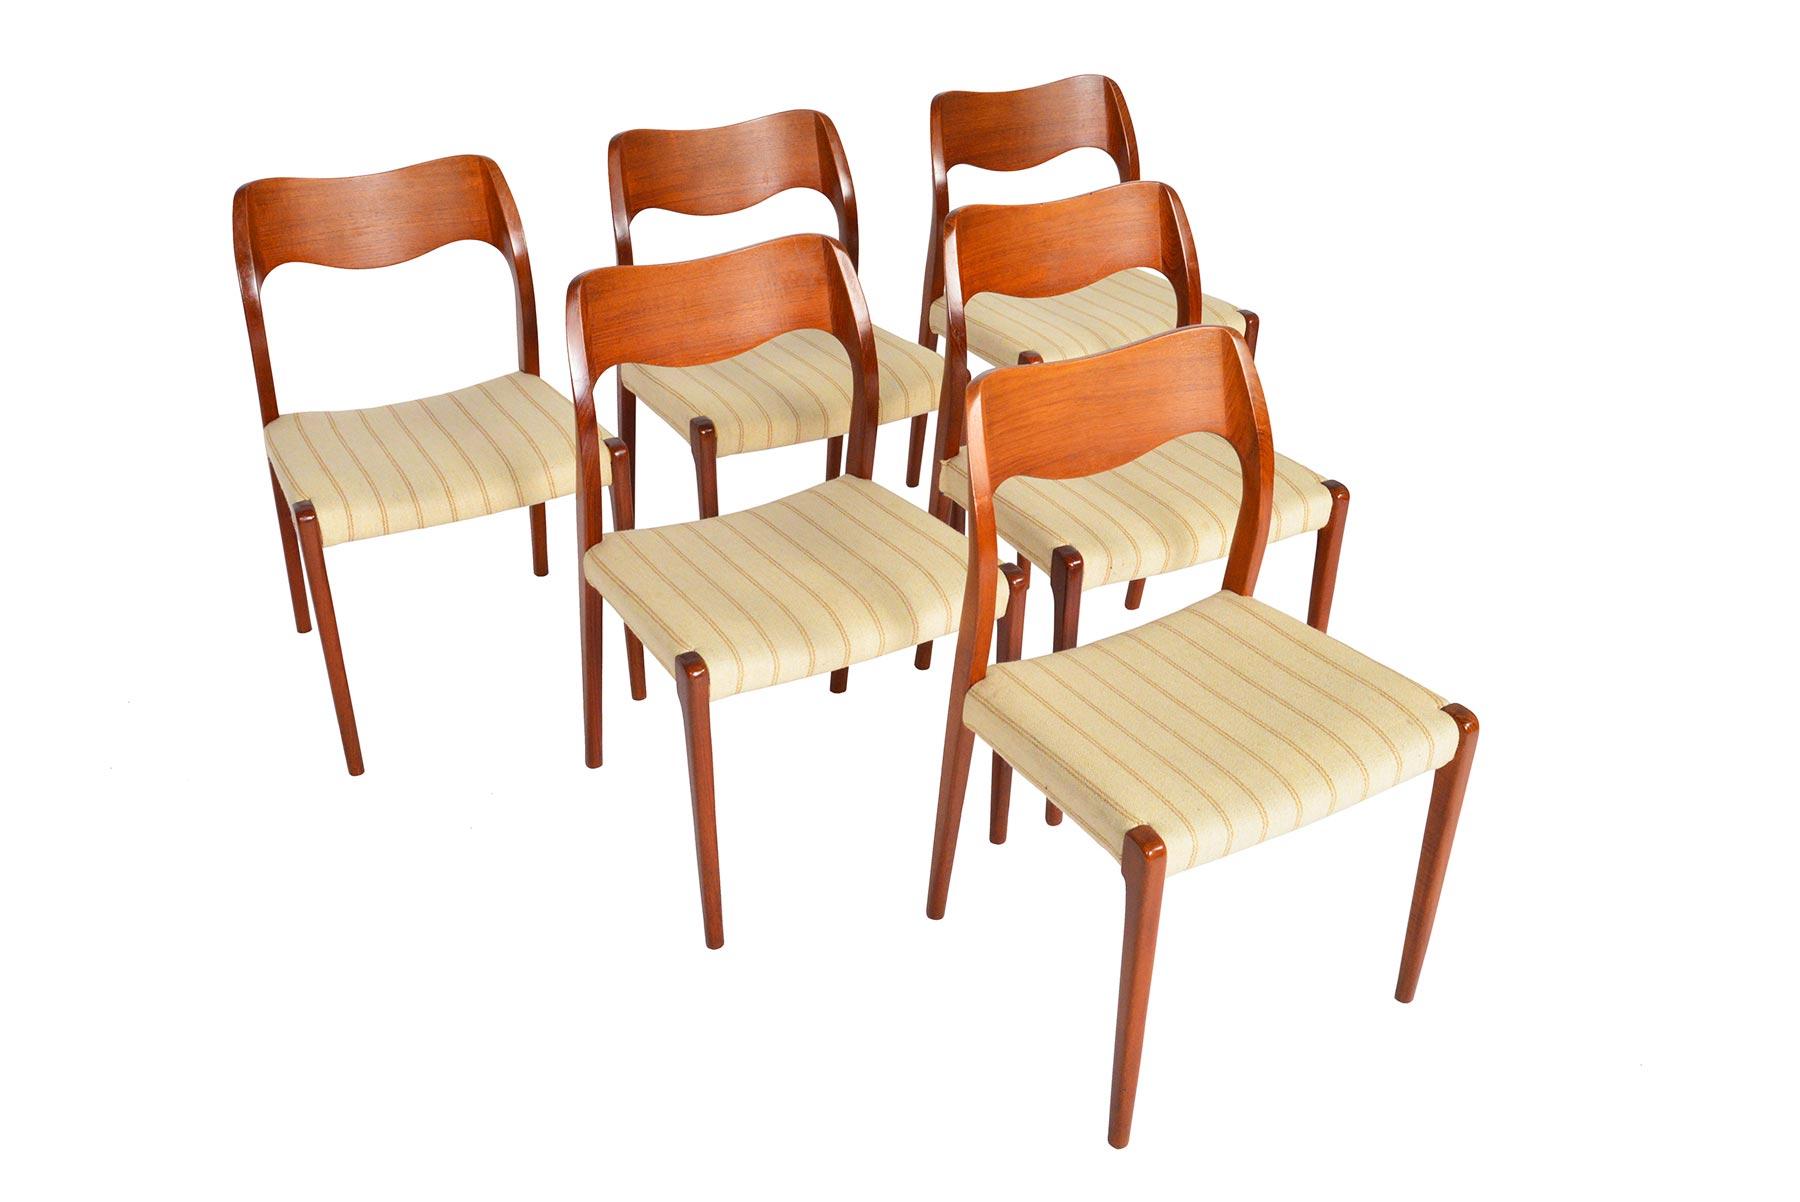 This set of six Møller Model 71 dining chairs in teak are a rare find. Designed in 1951 by Niels Otto Møller for J.L. Møllers Møbelfabrik, this set boasts superior craftsmanship throughout. This quintessential Scandinavian set offers a timeless